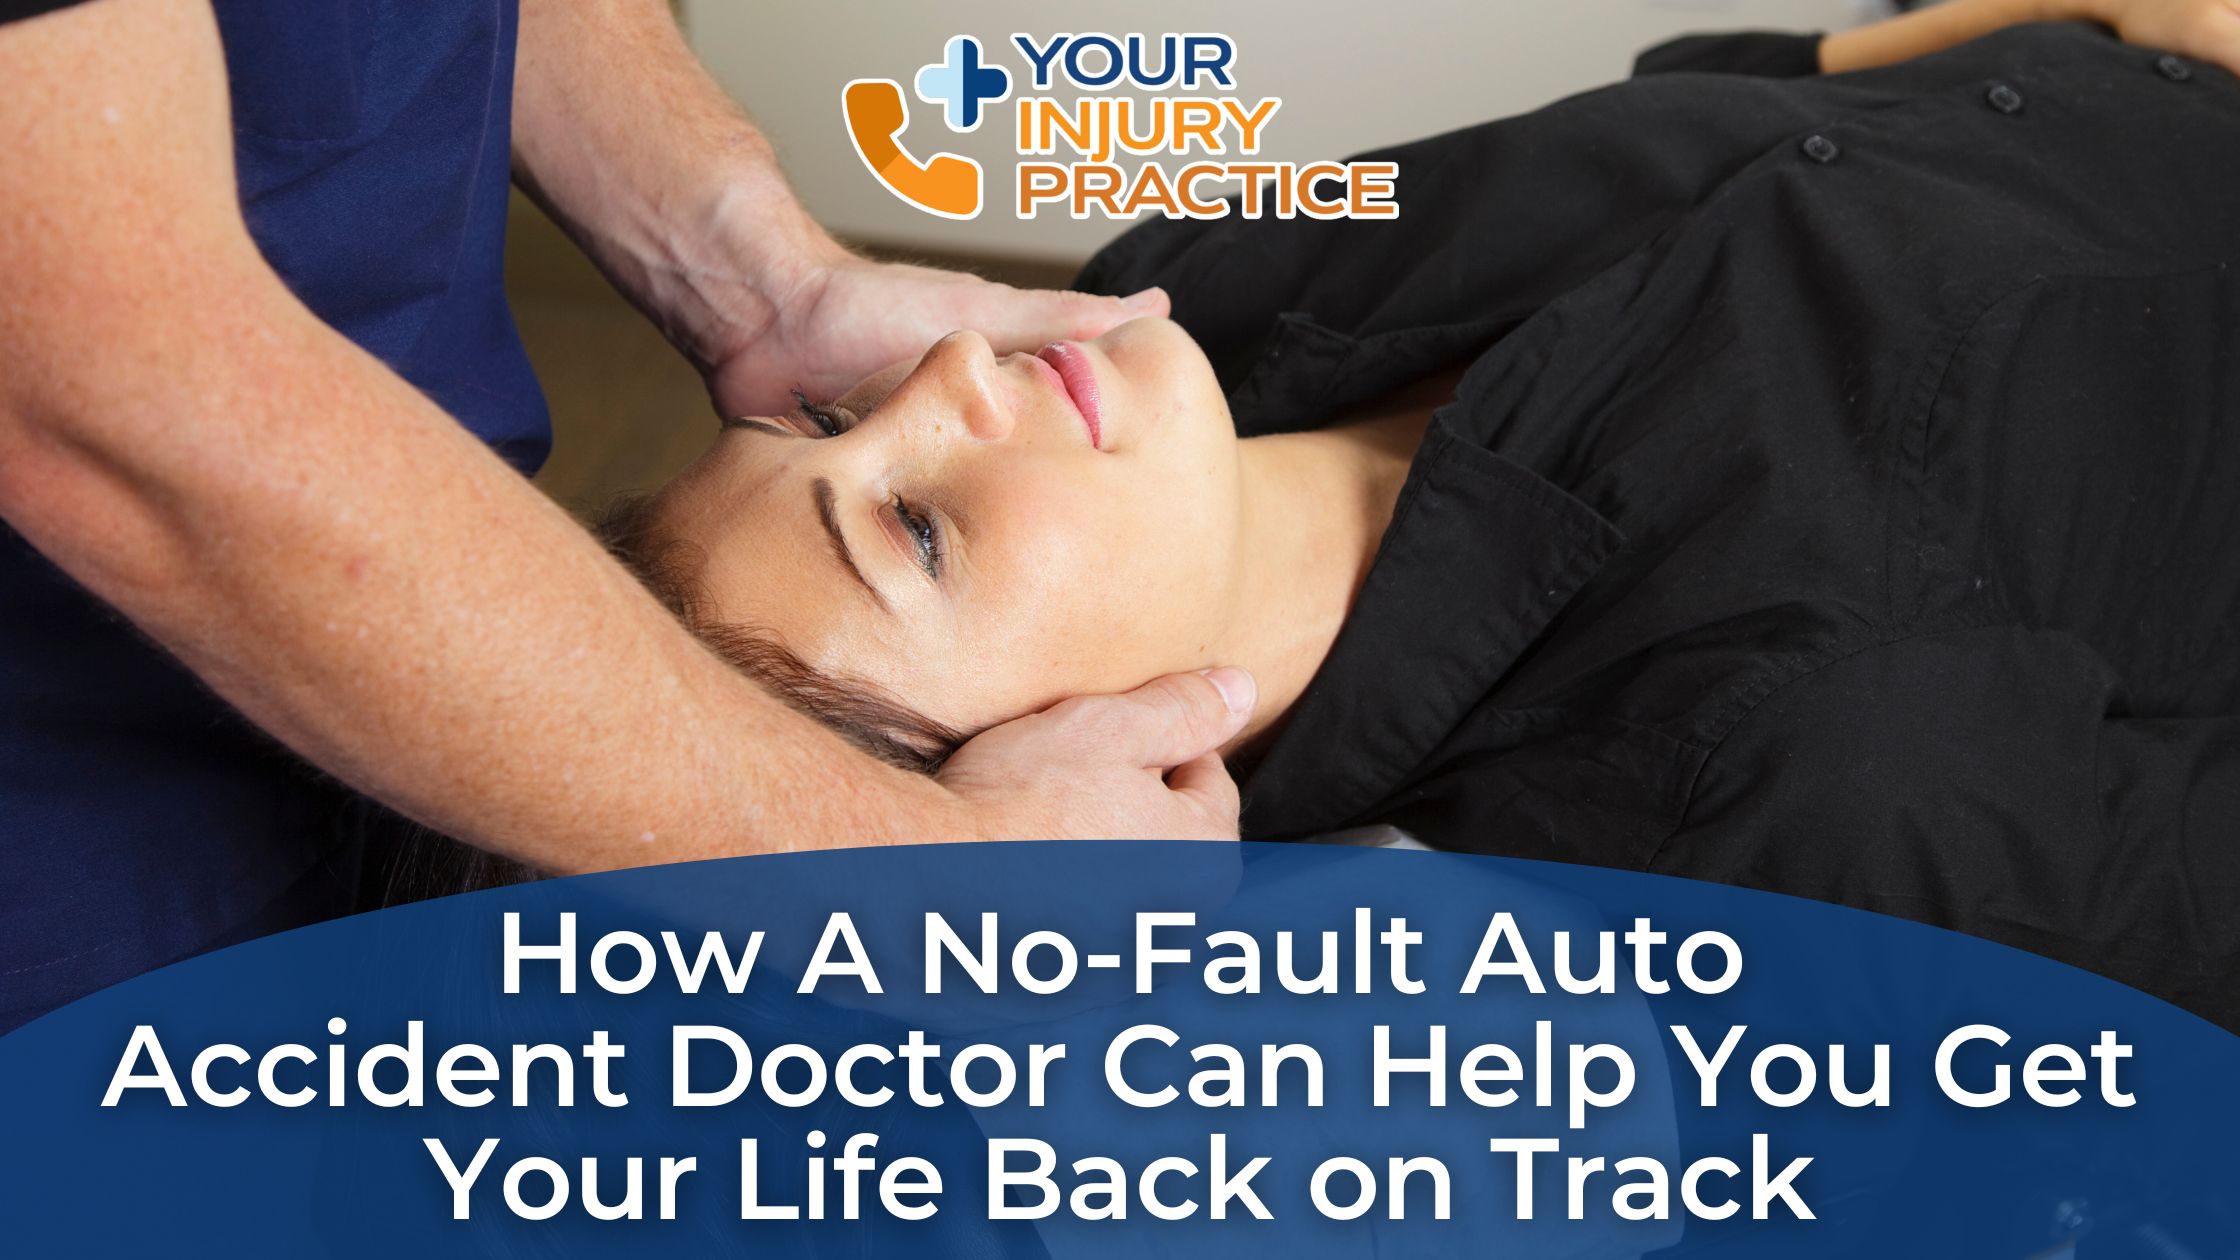 How To Move Forward After Your Auto Accident